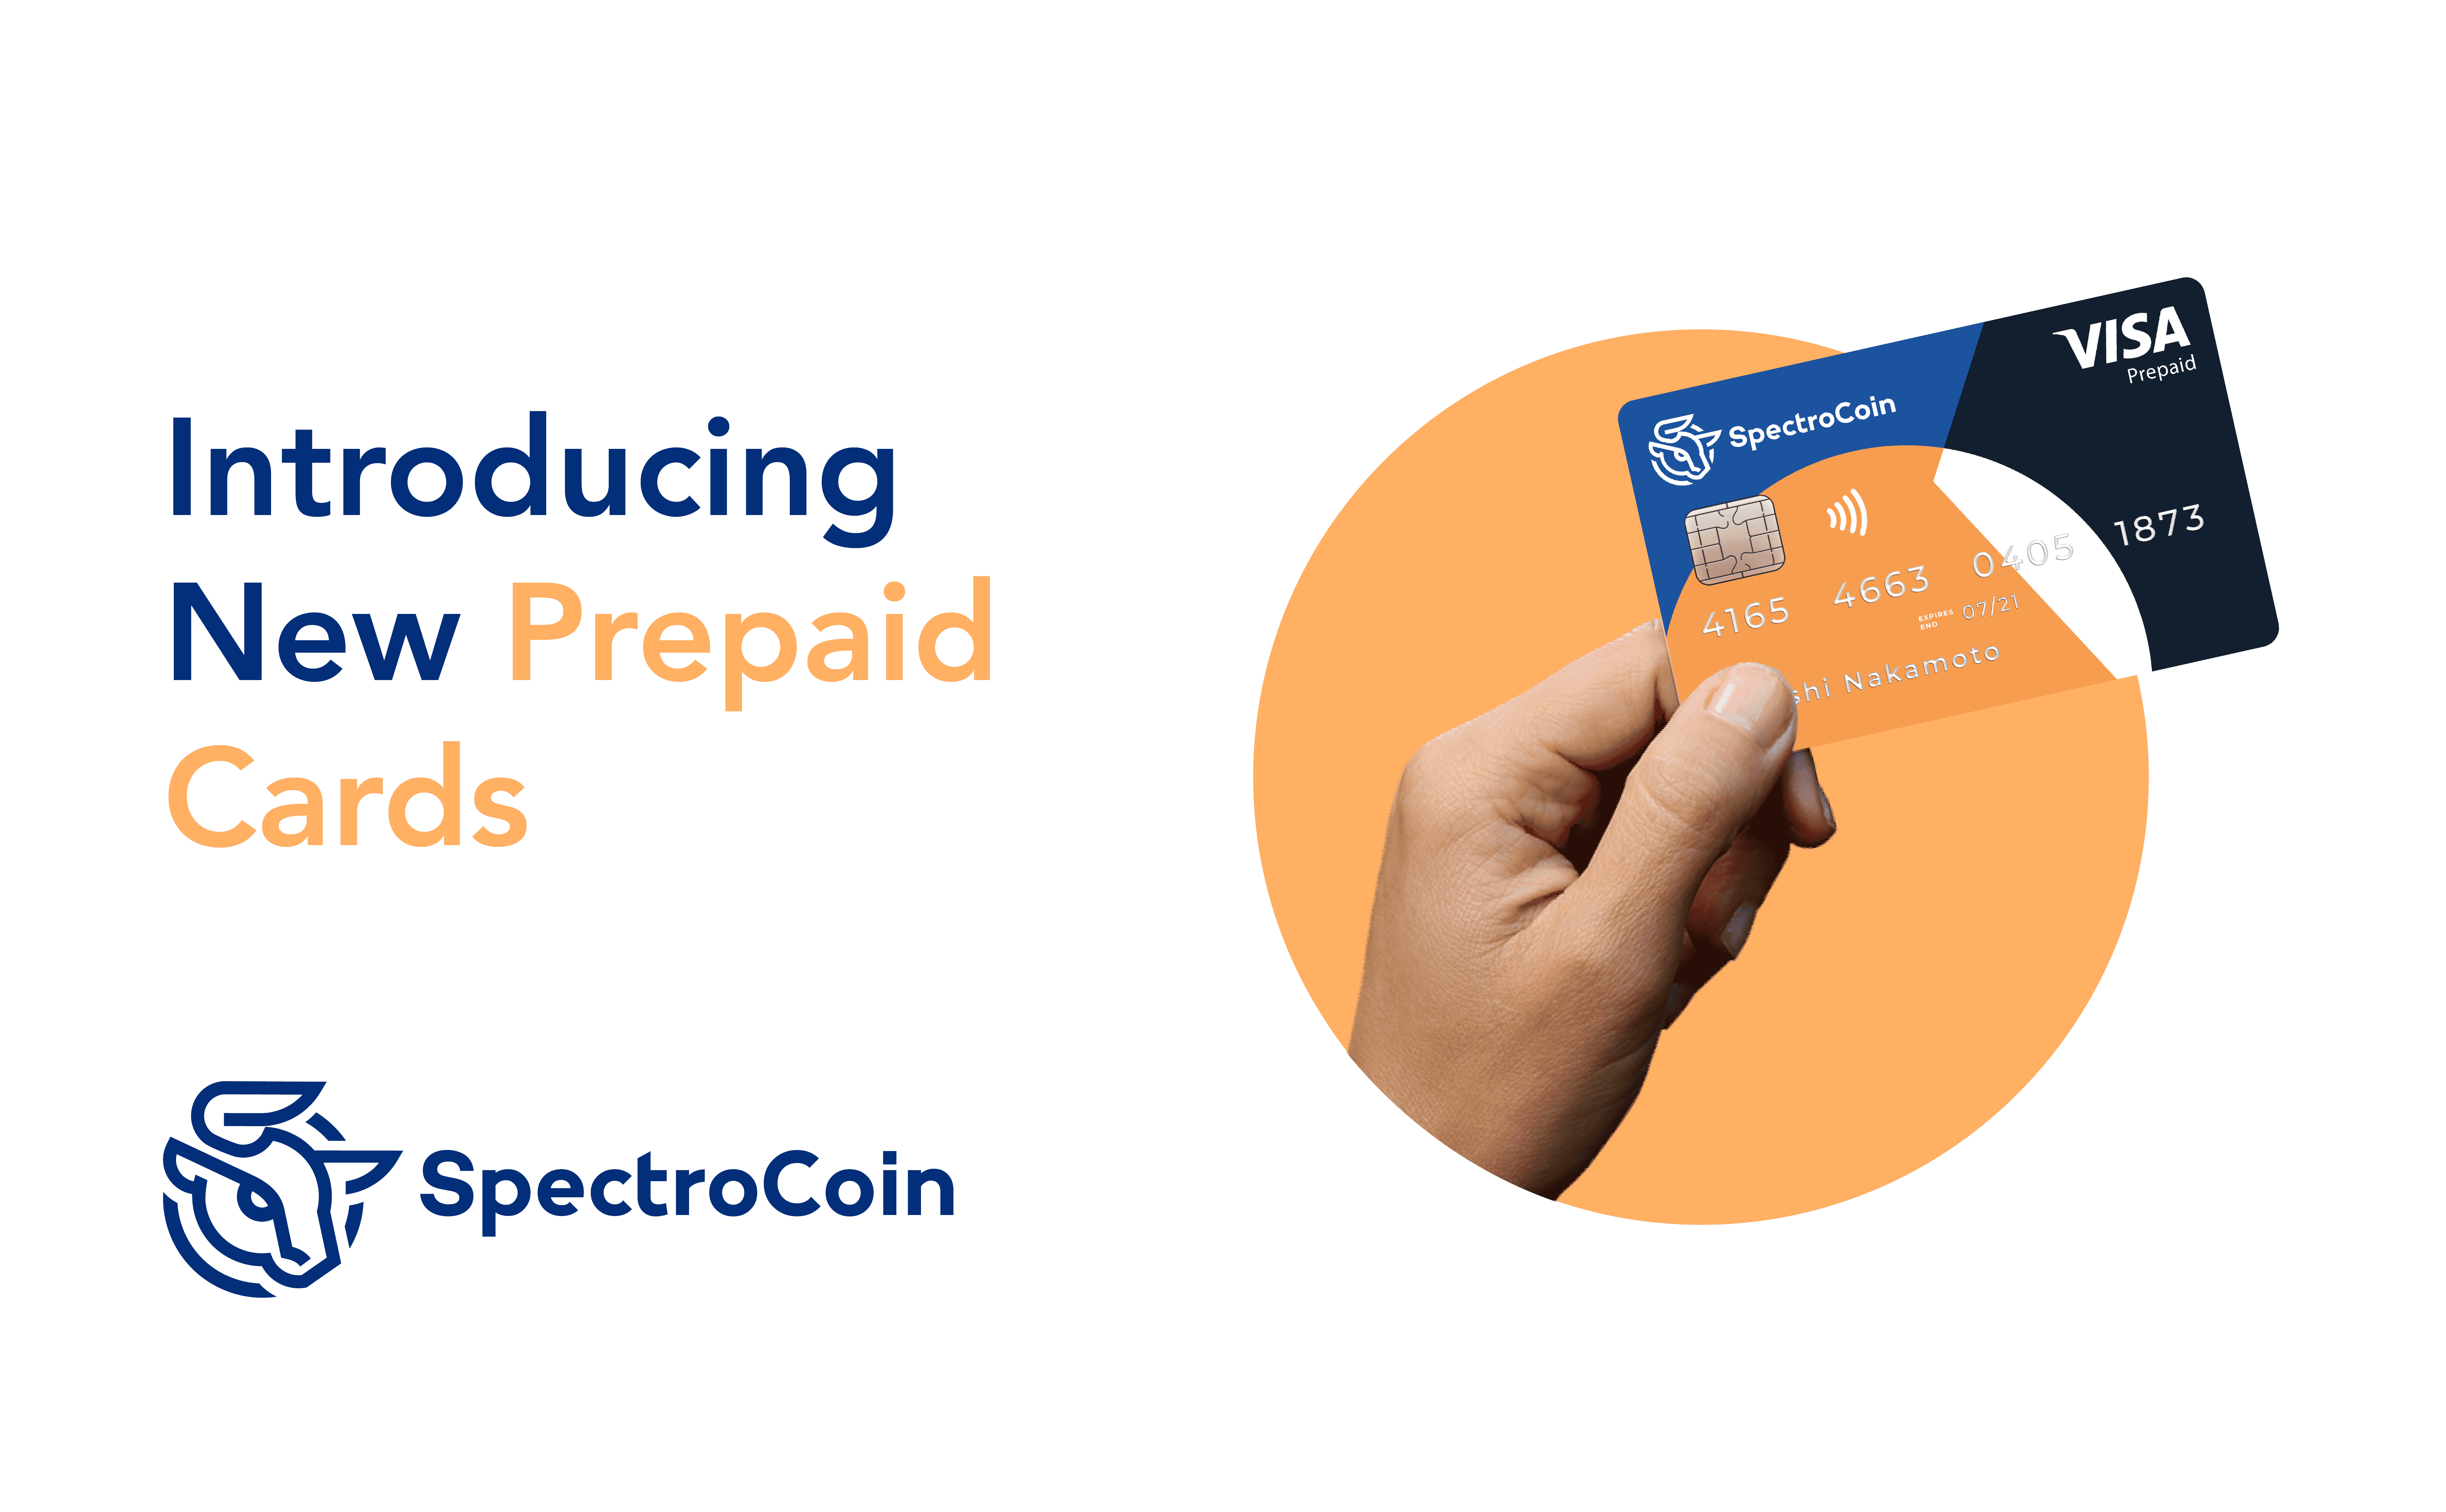 SpectroCoin is Introducing New Prepaid Cards